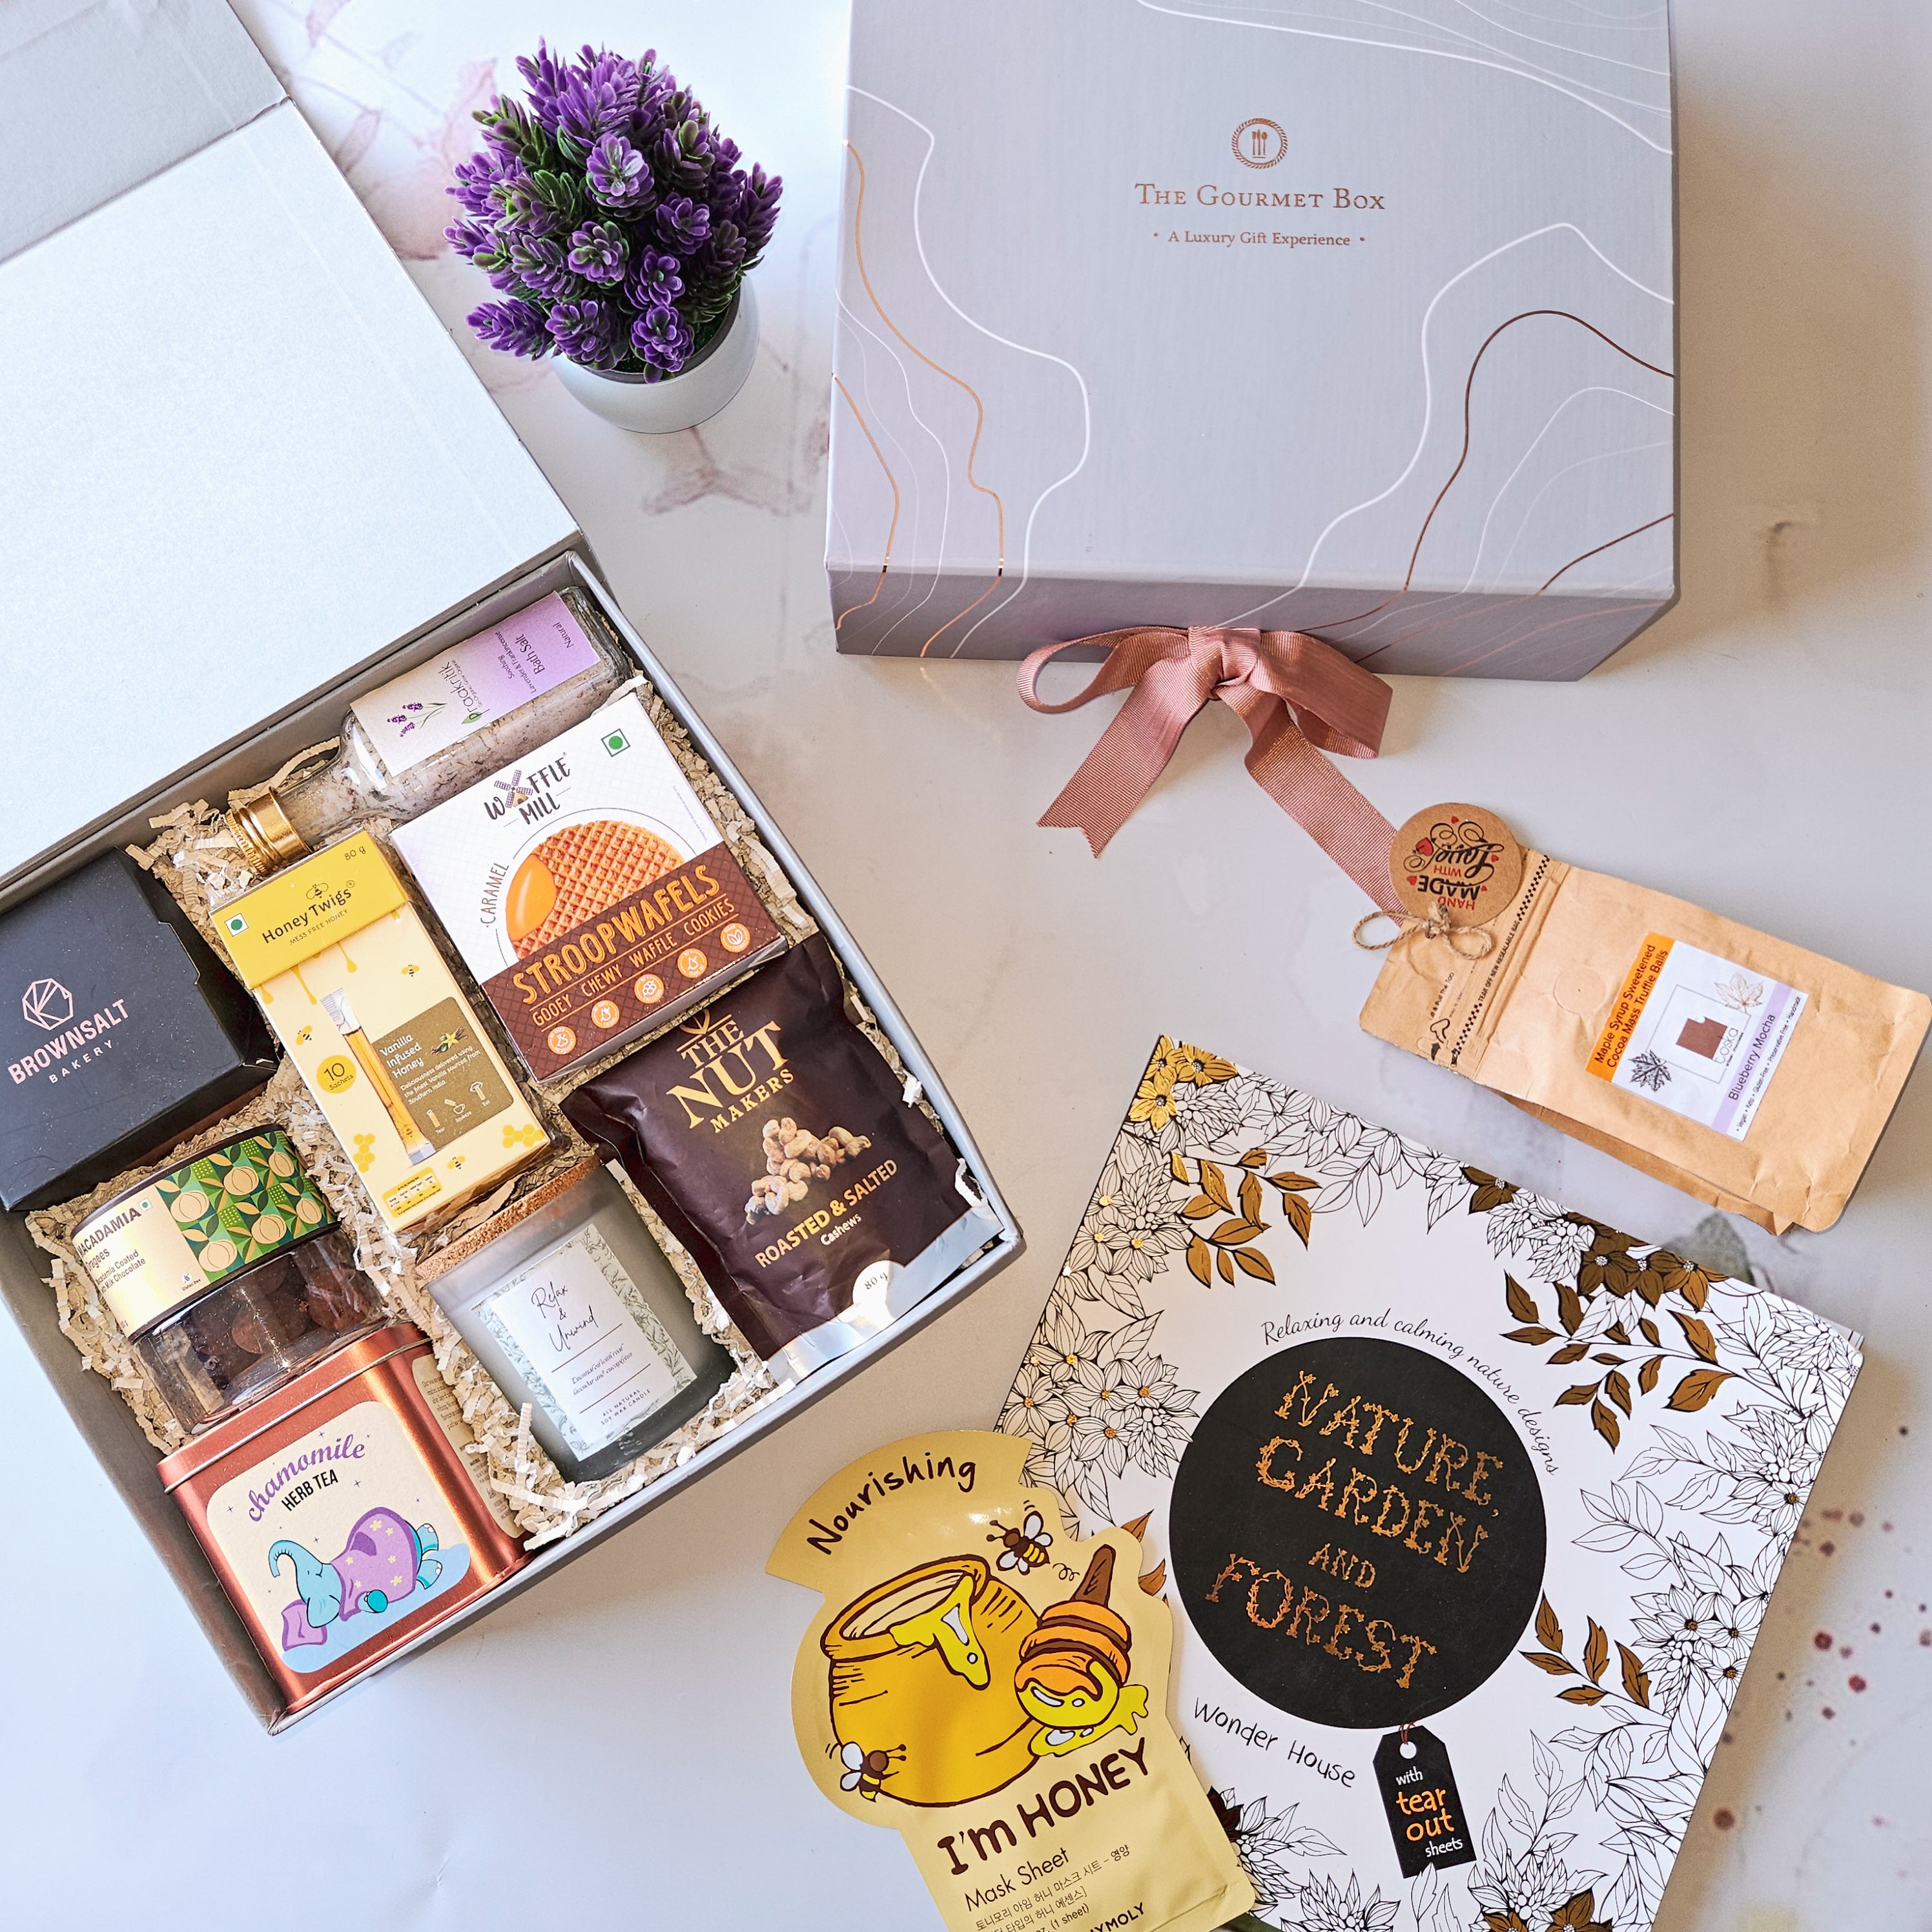 The Unwind Box / Relaxation Gift Hamper - Gift Hamper - The Gourmet Box